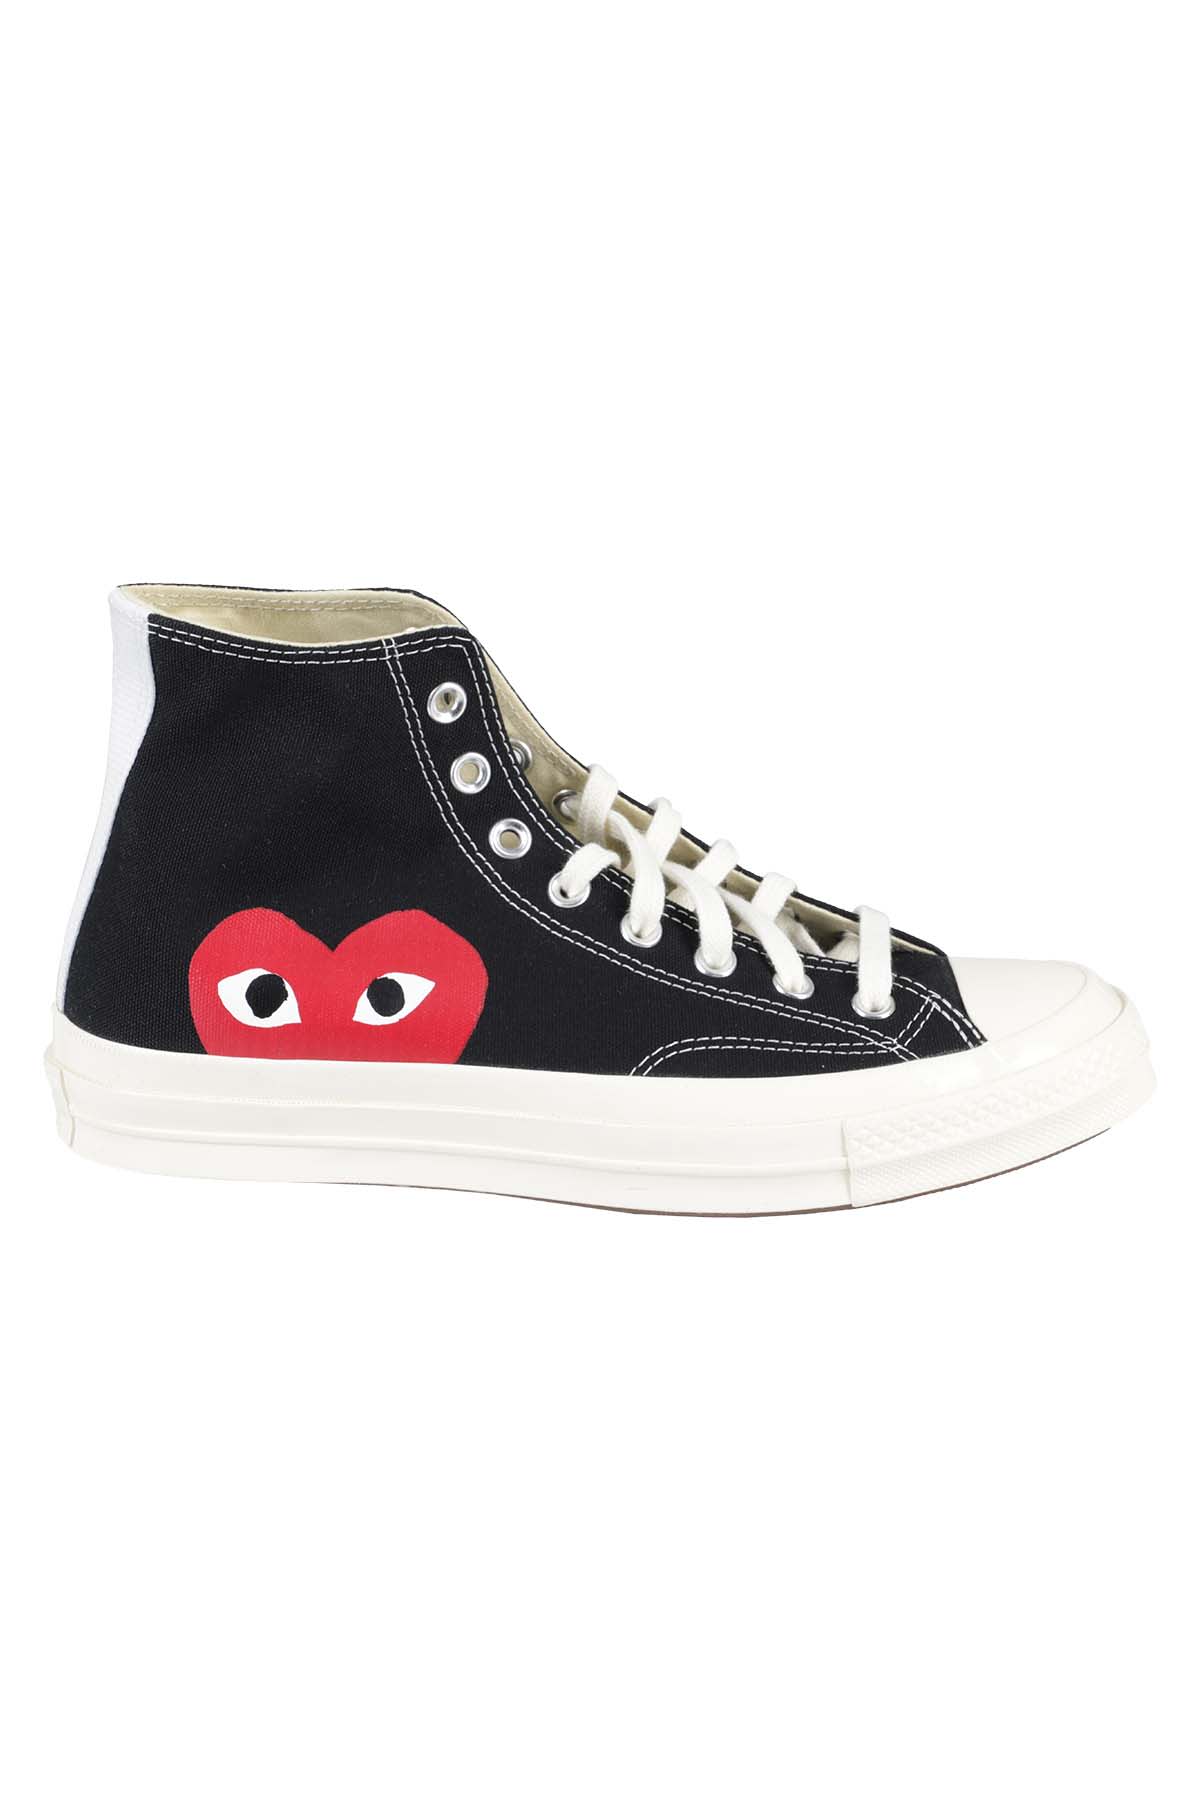 black converse with hearts